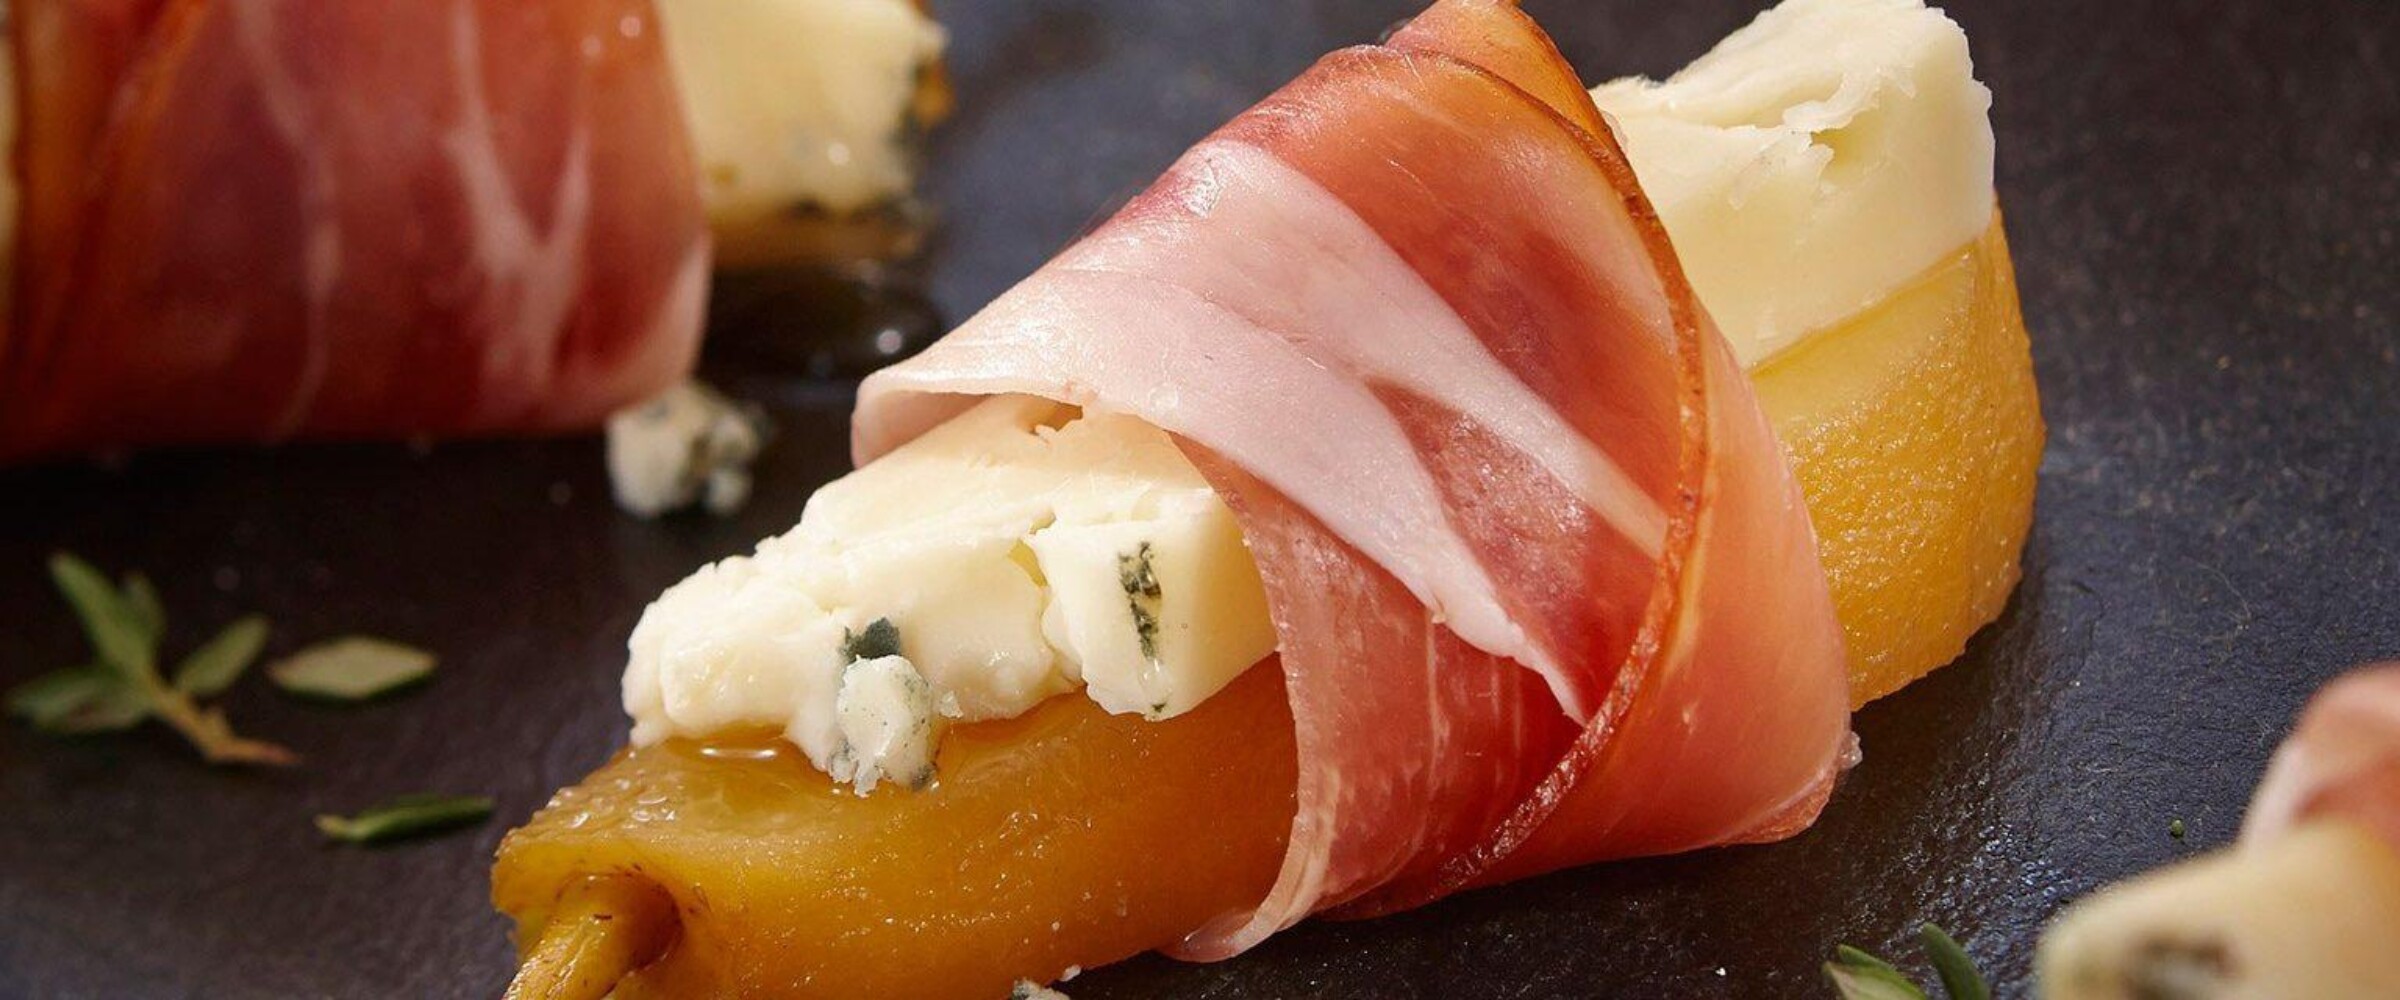 Pear wrapped with speck prosciutto and cheese